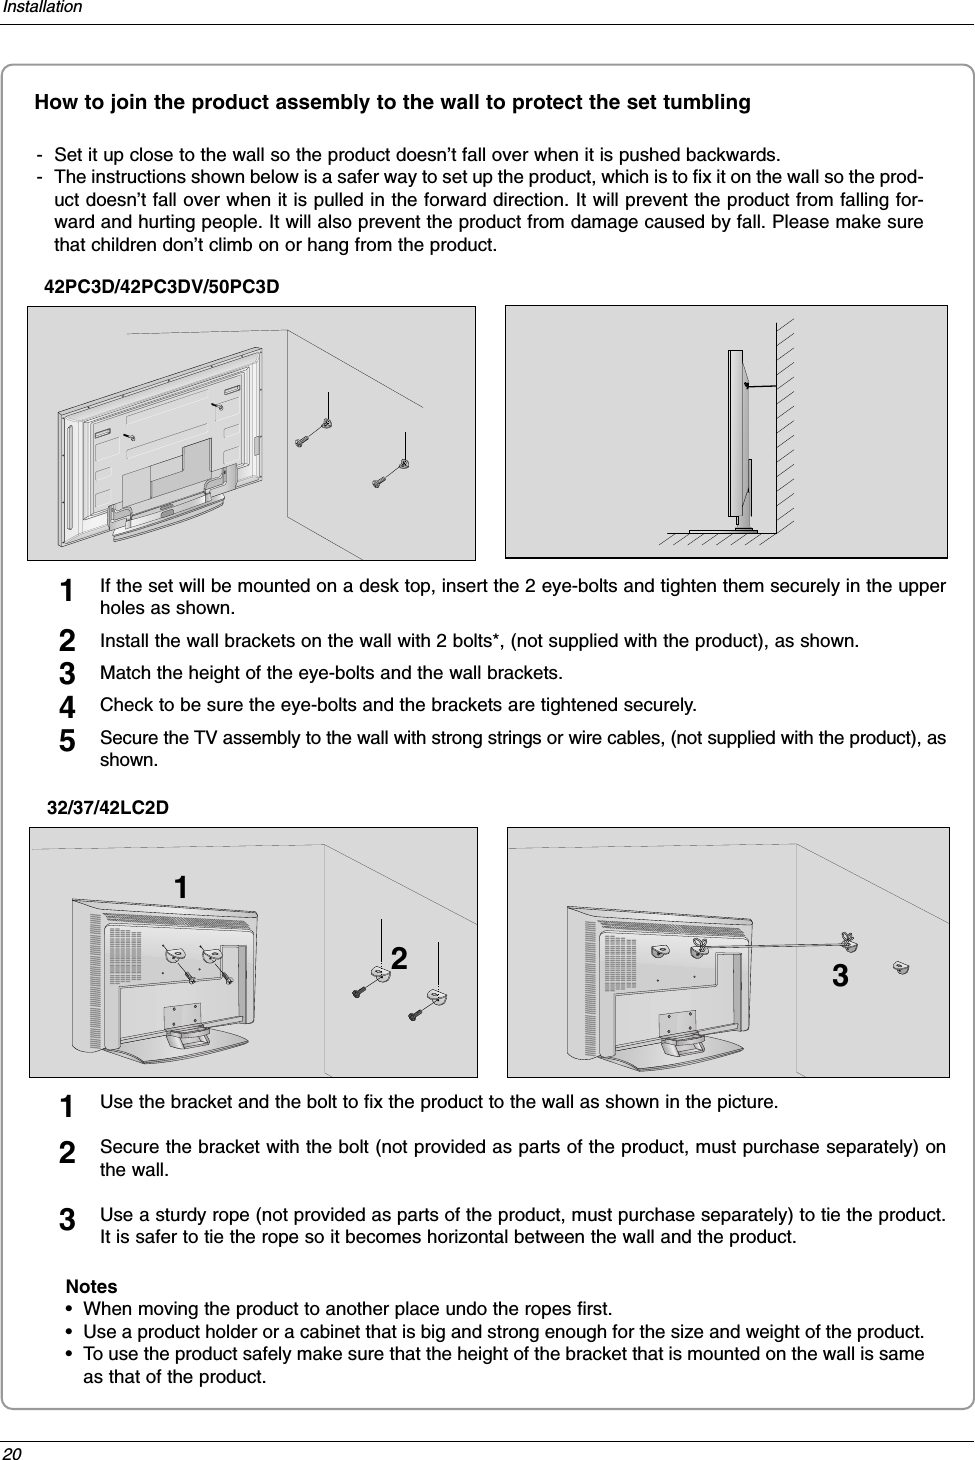 20InstallationHow to join the product assembly to the wall to protect the set tumbling- Set it up close to the wall so the product doesn’t fall over when it is pushed backwards. - The instructions shown below is a safer way to set up the product, which is to fix it on the wall so the prod-uct doesn’t fall over when it is pulled in the forward direction. It will prevent the product from falling for-ward and hurting people. It will also prevent the product from damage caused by fall. Please make surethat children don’t climb on or hang from the product. 42PC3D/42PC3DV/50PC3DNotes•When moving the product to another place undo the ropes first.•Use a product holder or a cabinet that is big and strong enough for the size and weight of the product. •To use the product safely make sure that the height of the bracket that is mounted on the wall is sameas that of the product. 2 13Use the bracket and the bolt to fix the product to the wall as shown in the picture. Secure the bracket with the bolt (not provided as parts of the product, must purchase separately) onthe wall.Use a sturdy rope (not provided as parts of the product, must purchase separately) to tie the product.It is safer to tie the rope so it becomes horizontal between the wall and the product.12332/37/42LC2DIf the set will be mounted on a desk top, insert the 2 eye-bolts and tighten them securely in the upperholes as shown.Install the wall brackets on the wall with 2 bolts*, (not supplied with the product), as shown.Match the height of the eye-bolts and the wall brackets.Check to be sure the eye-bolts and the brackets are tightened securely.Secure the TV assembly to the wall with strong strings or wire cables, (not supplied with the product), asshown.12345